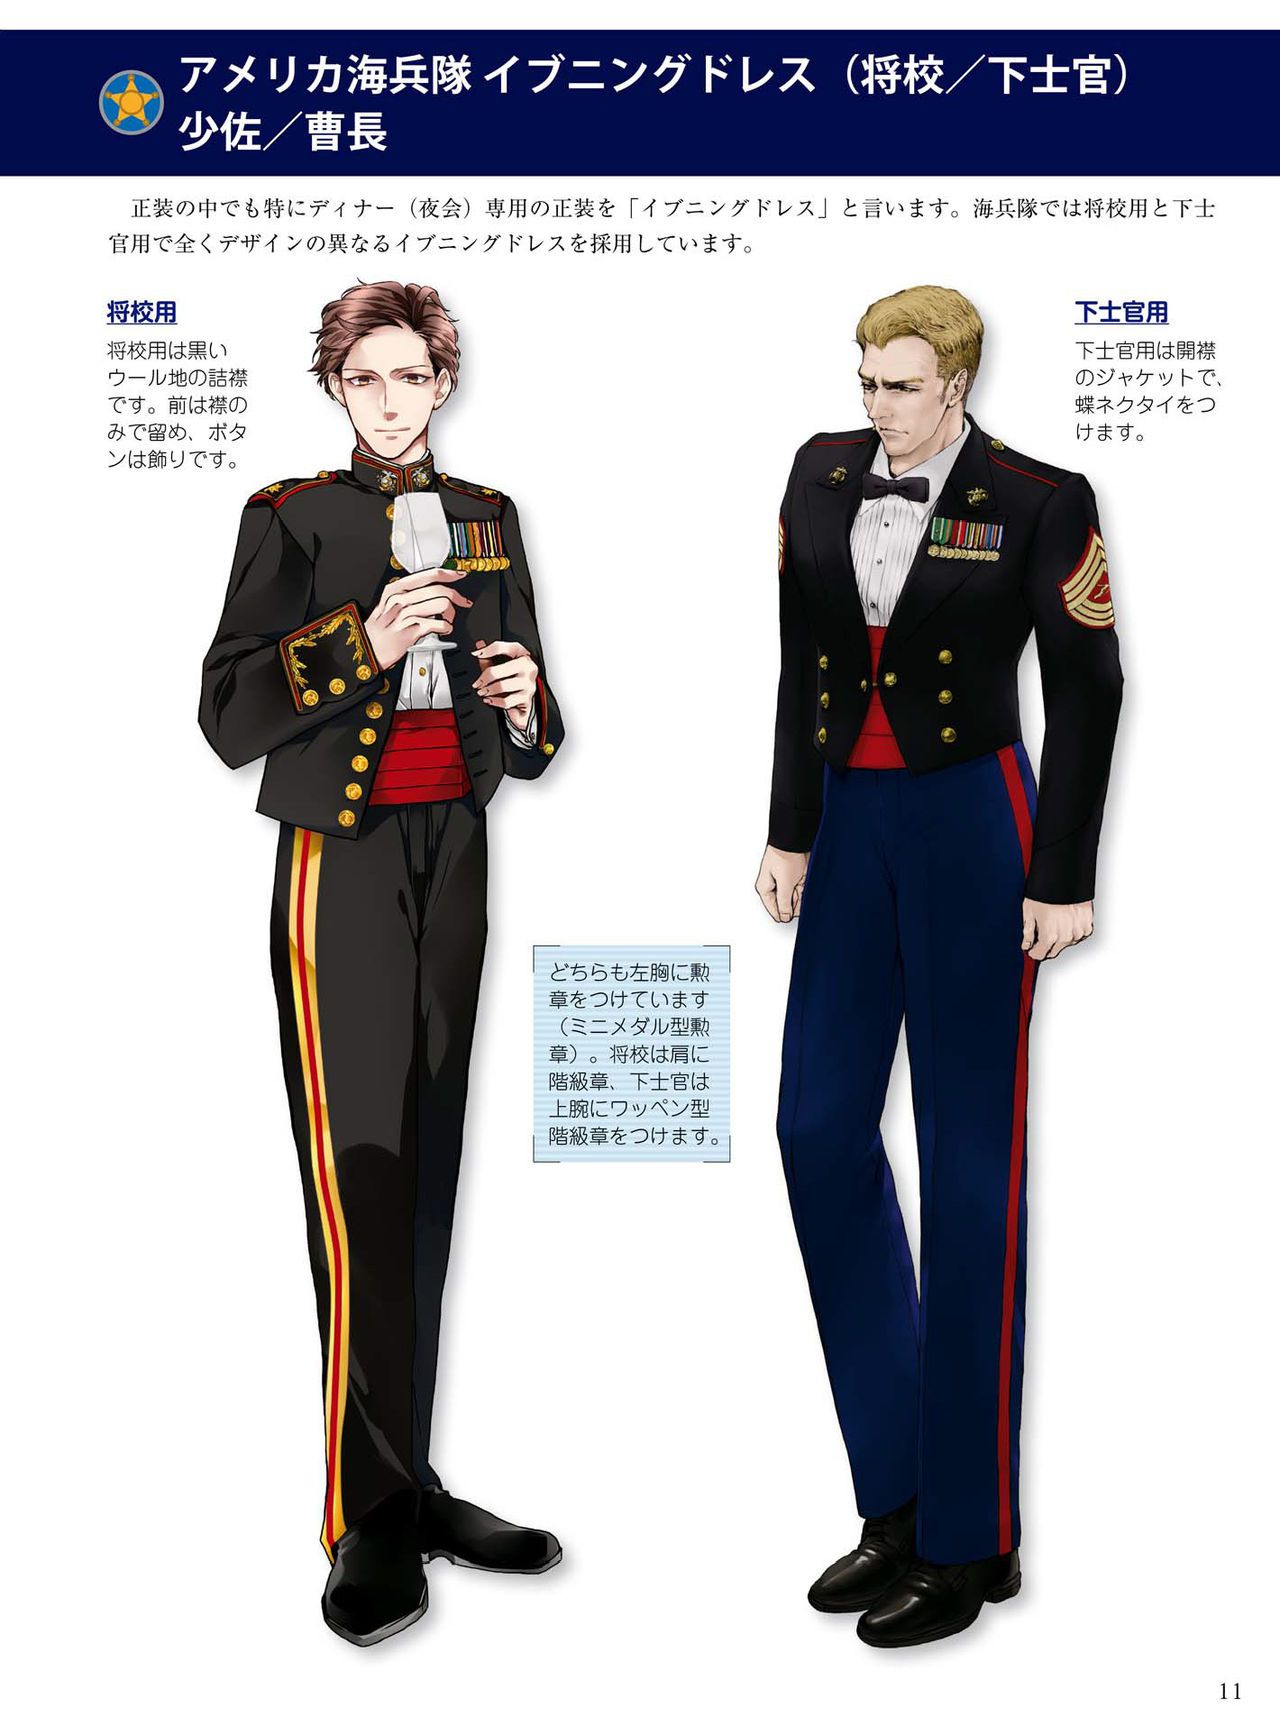 How to draw military uniforms and uniforms From Self-Defense Forces 軍服・制服の描き方 アメリカ軍・自衛隊の制服から戦闘服まで 14